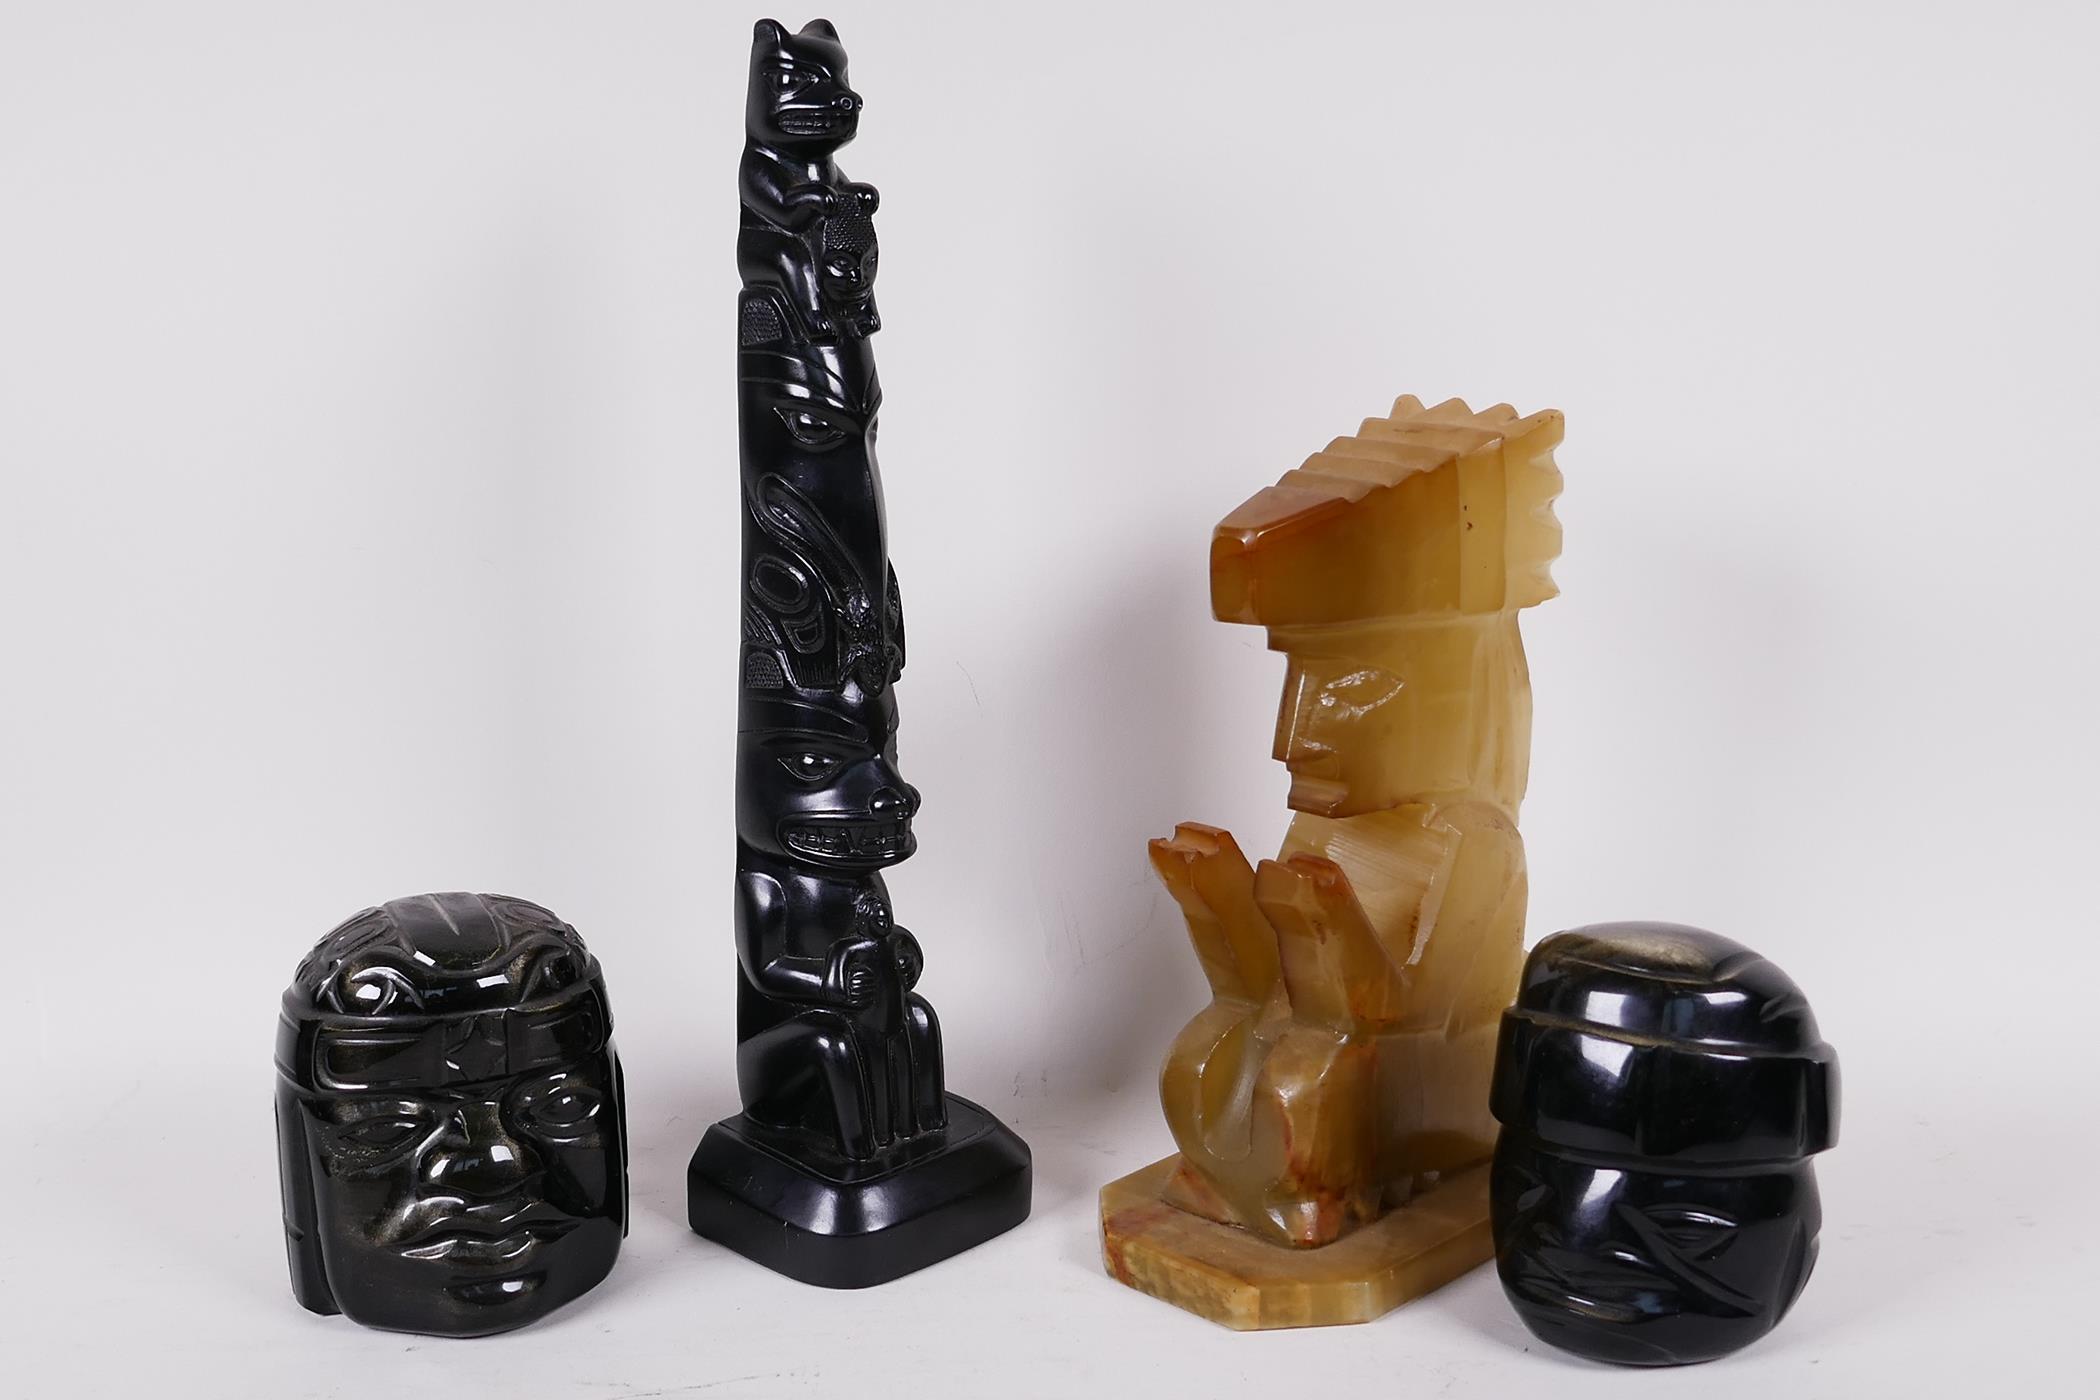 Two Mexican carved obsidian heads, a carved onyx seated figure 7" high, and a Canadian carved